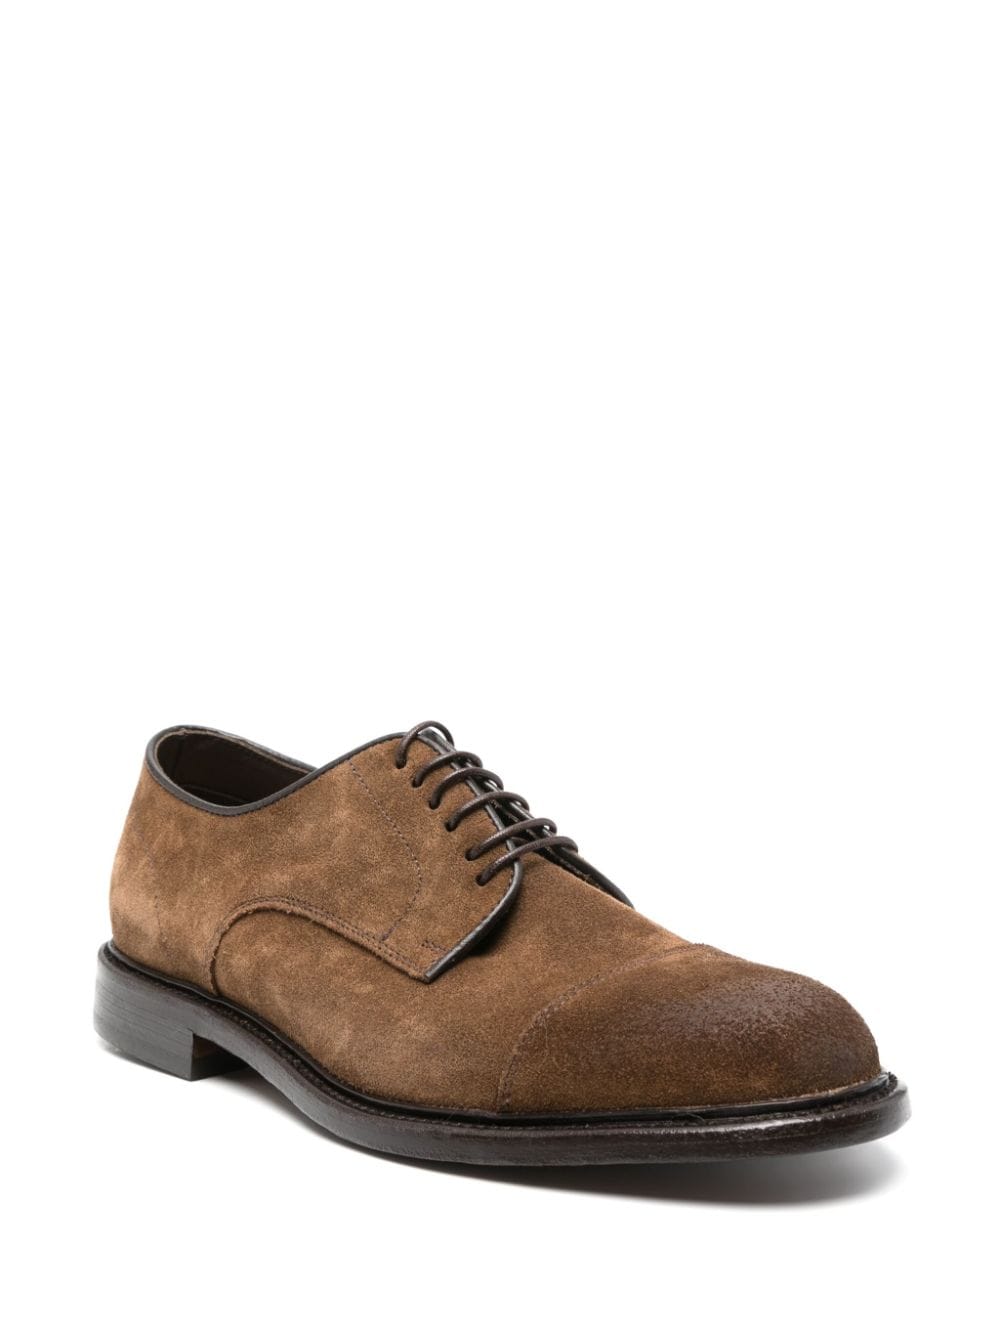 Image 2 of Cenere GB suede oxford shoes